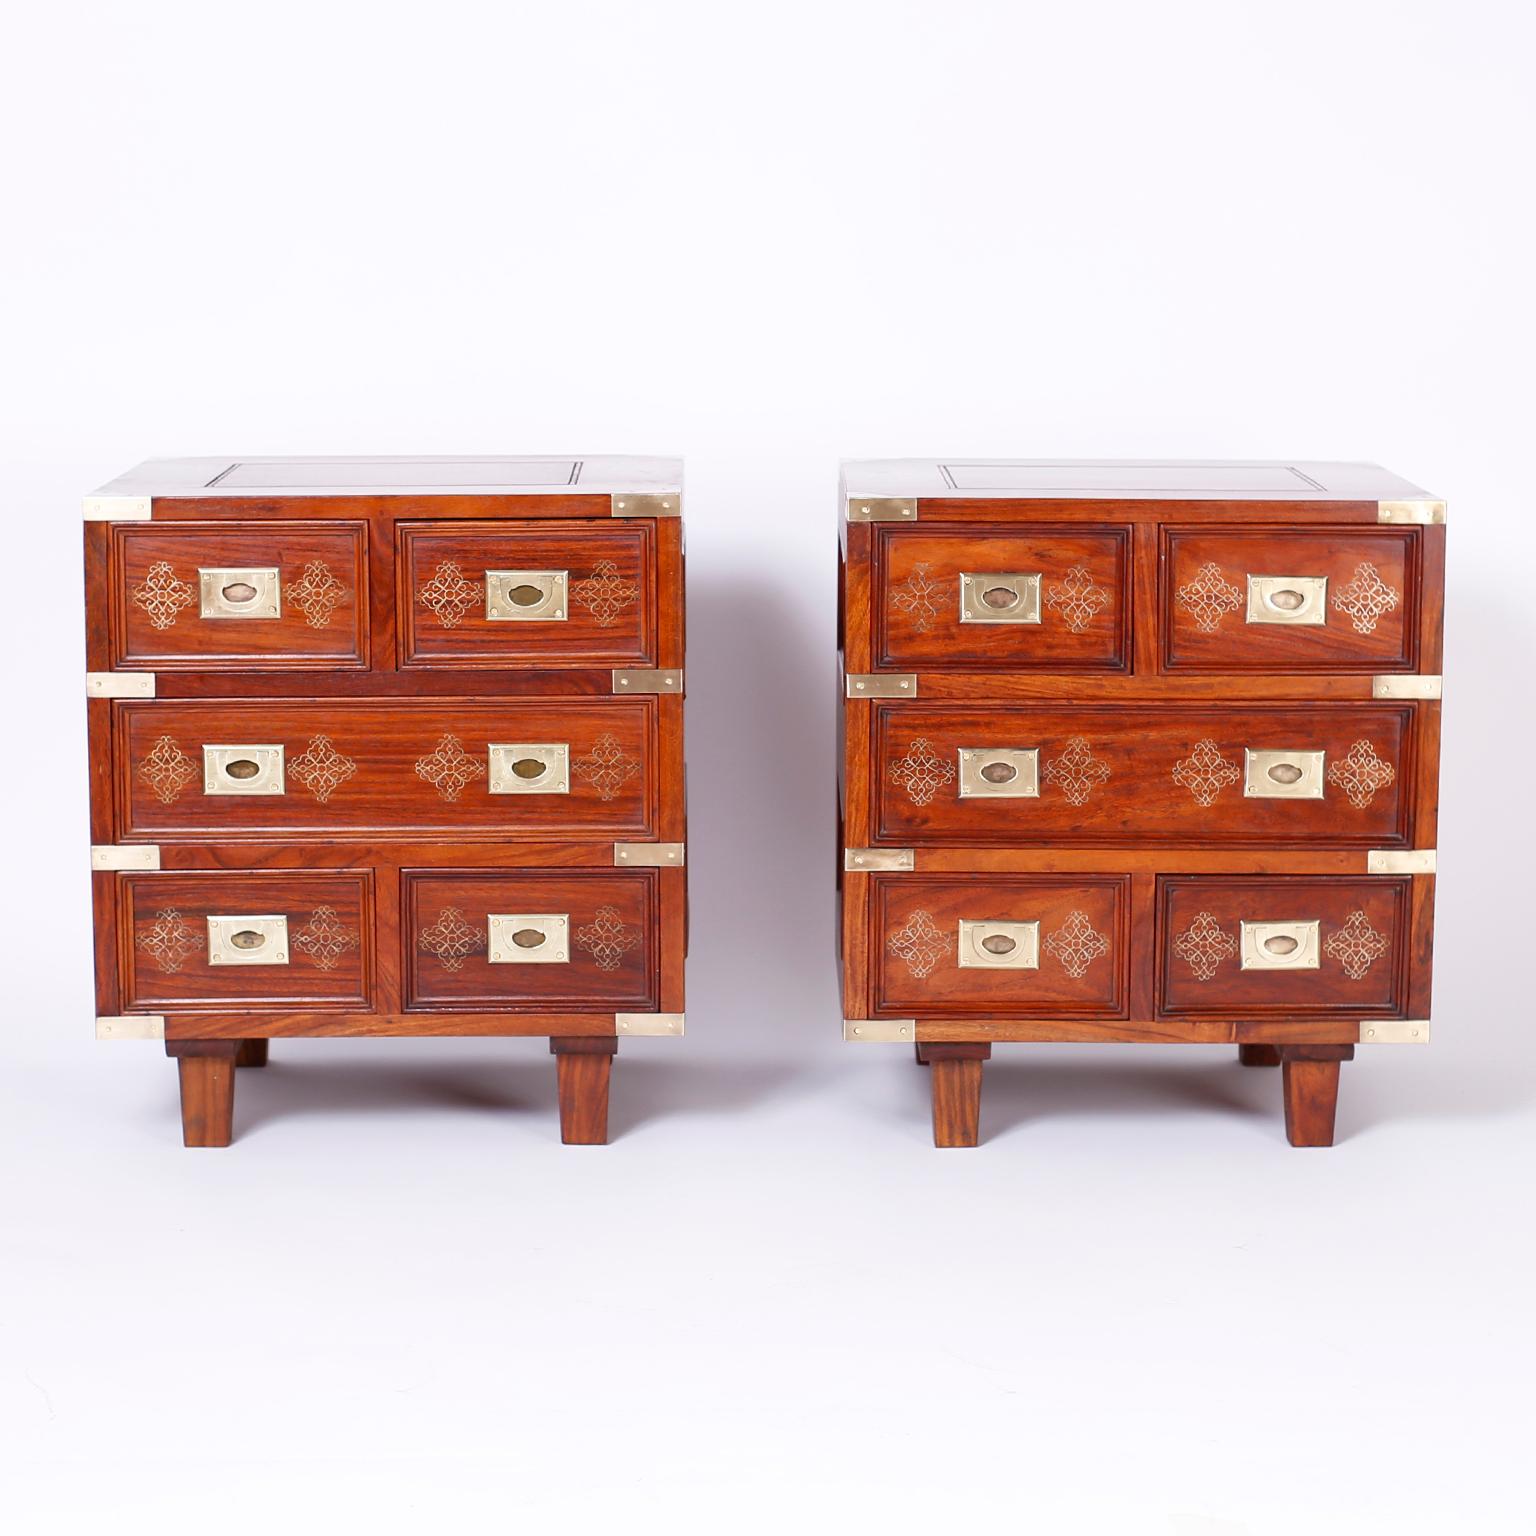 Pair of British colonial five-drawer stands crafted in indigenous rosewood with paneled sides and tops, brass campaign hardware, and featuring brass inlaid floral designs.